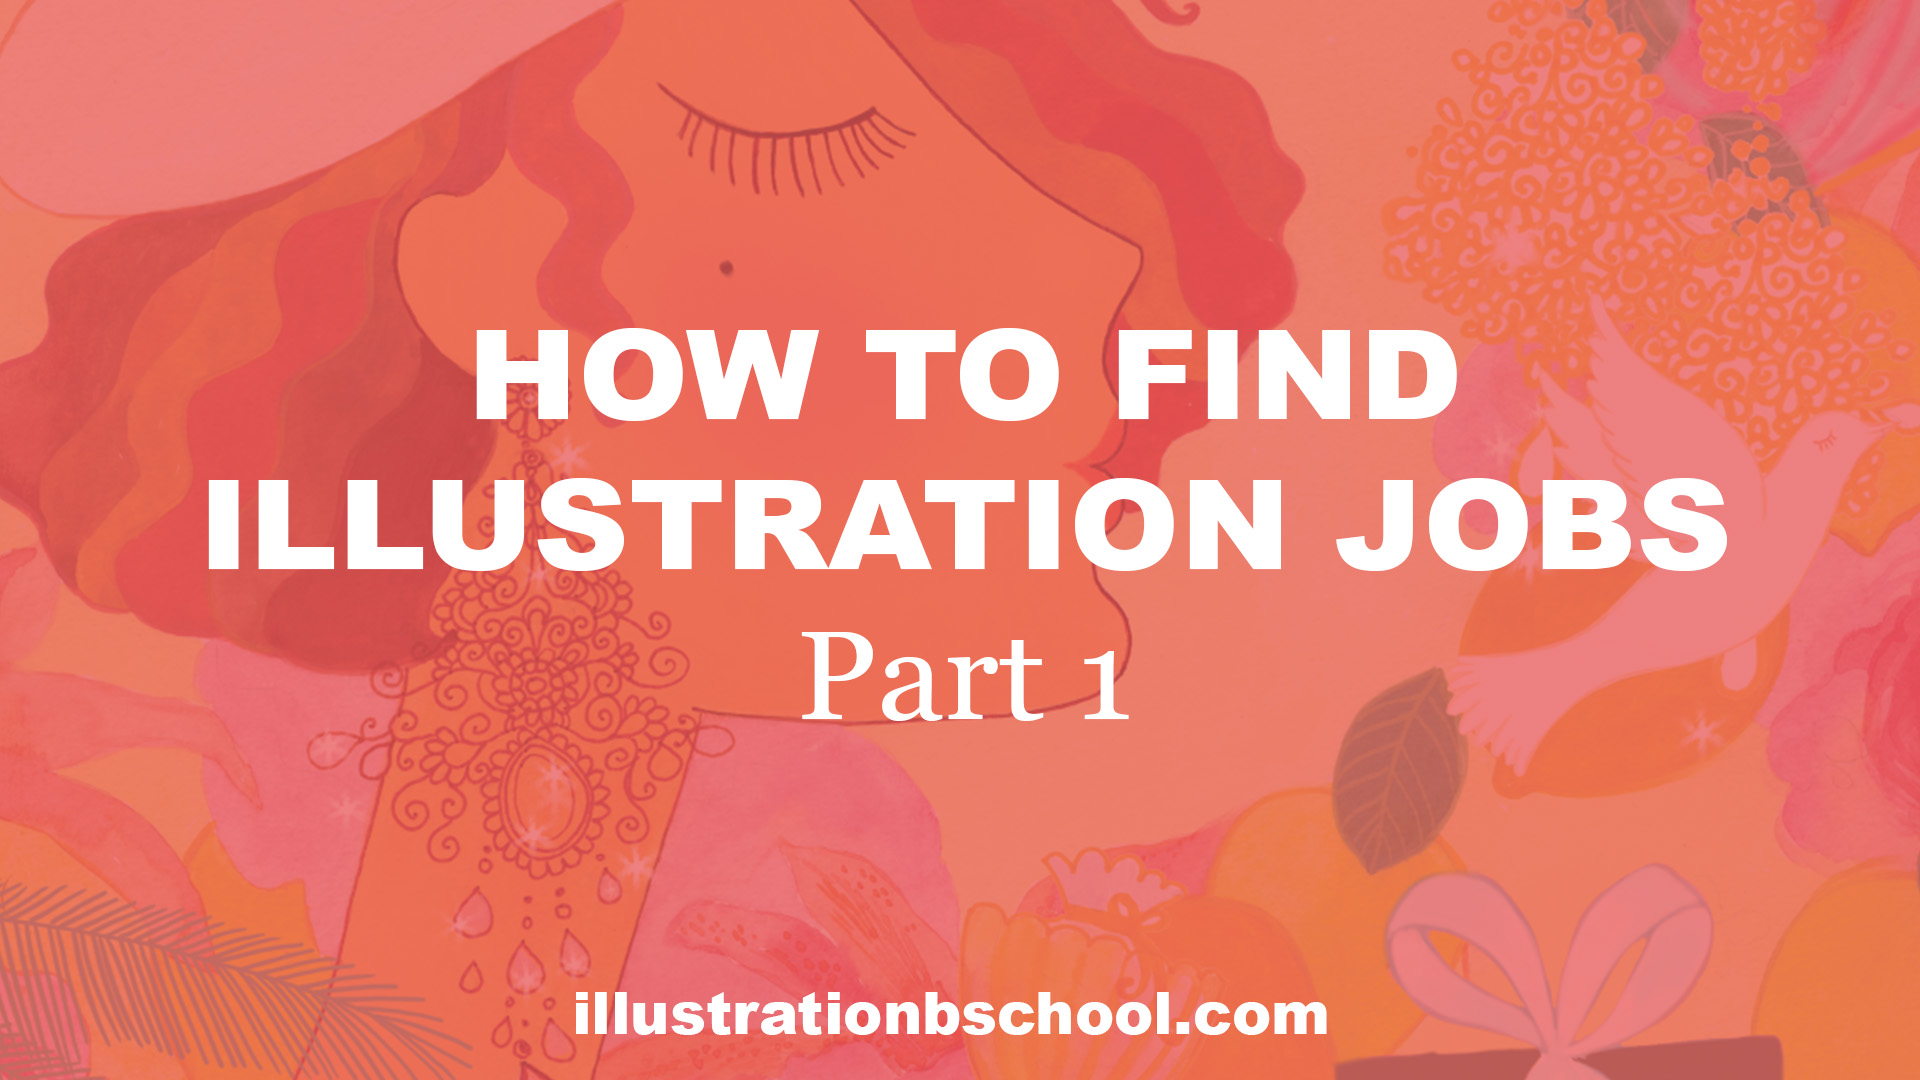 how-to-find-illustration-jobs-part1-thumb